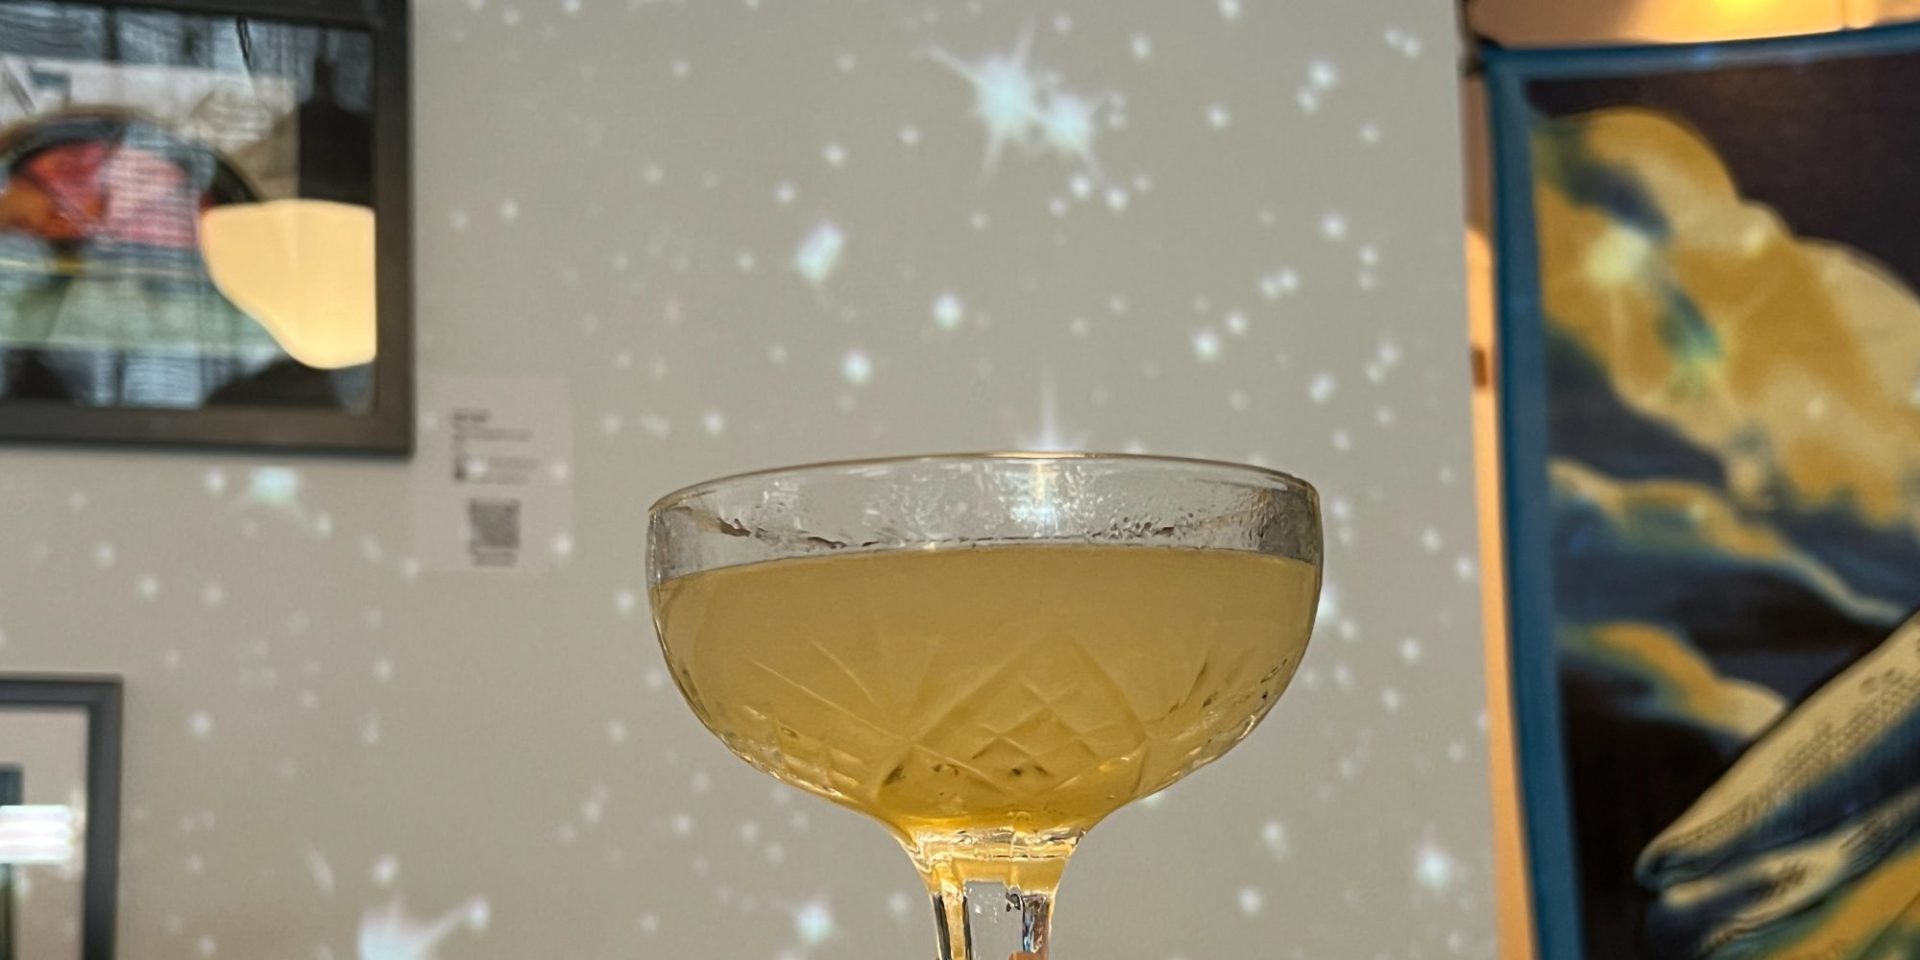 A coupe glass with a golden yellow drink in front of a white wall with projected starbursts.